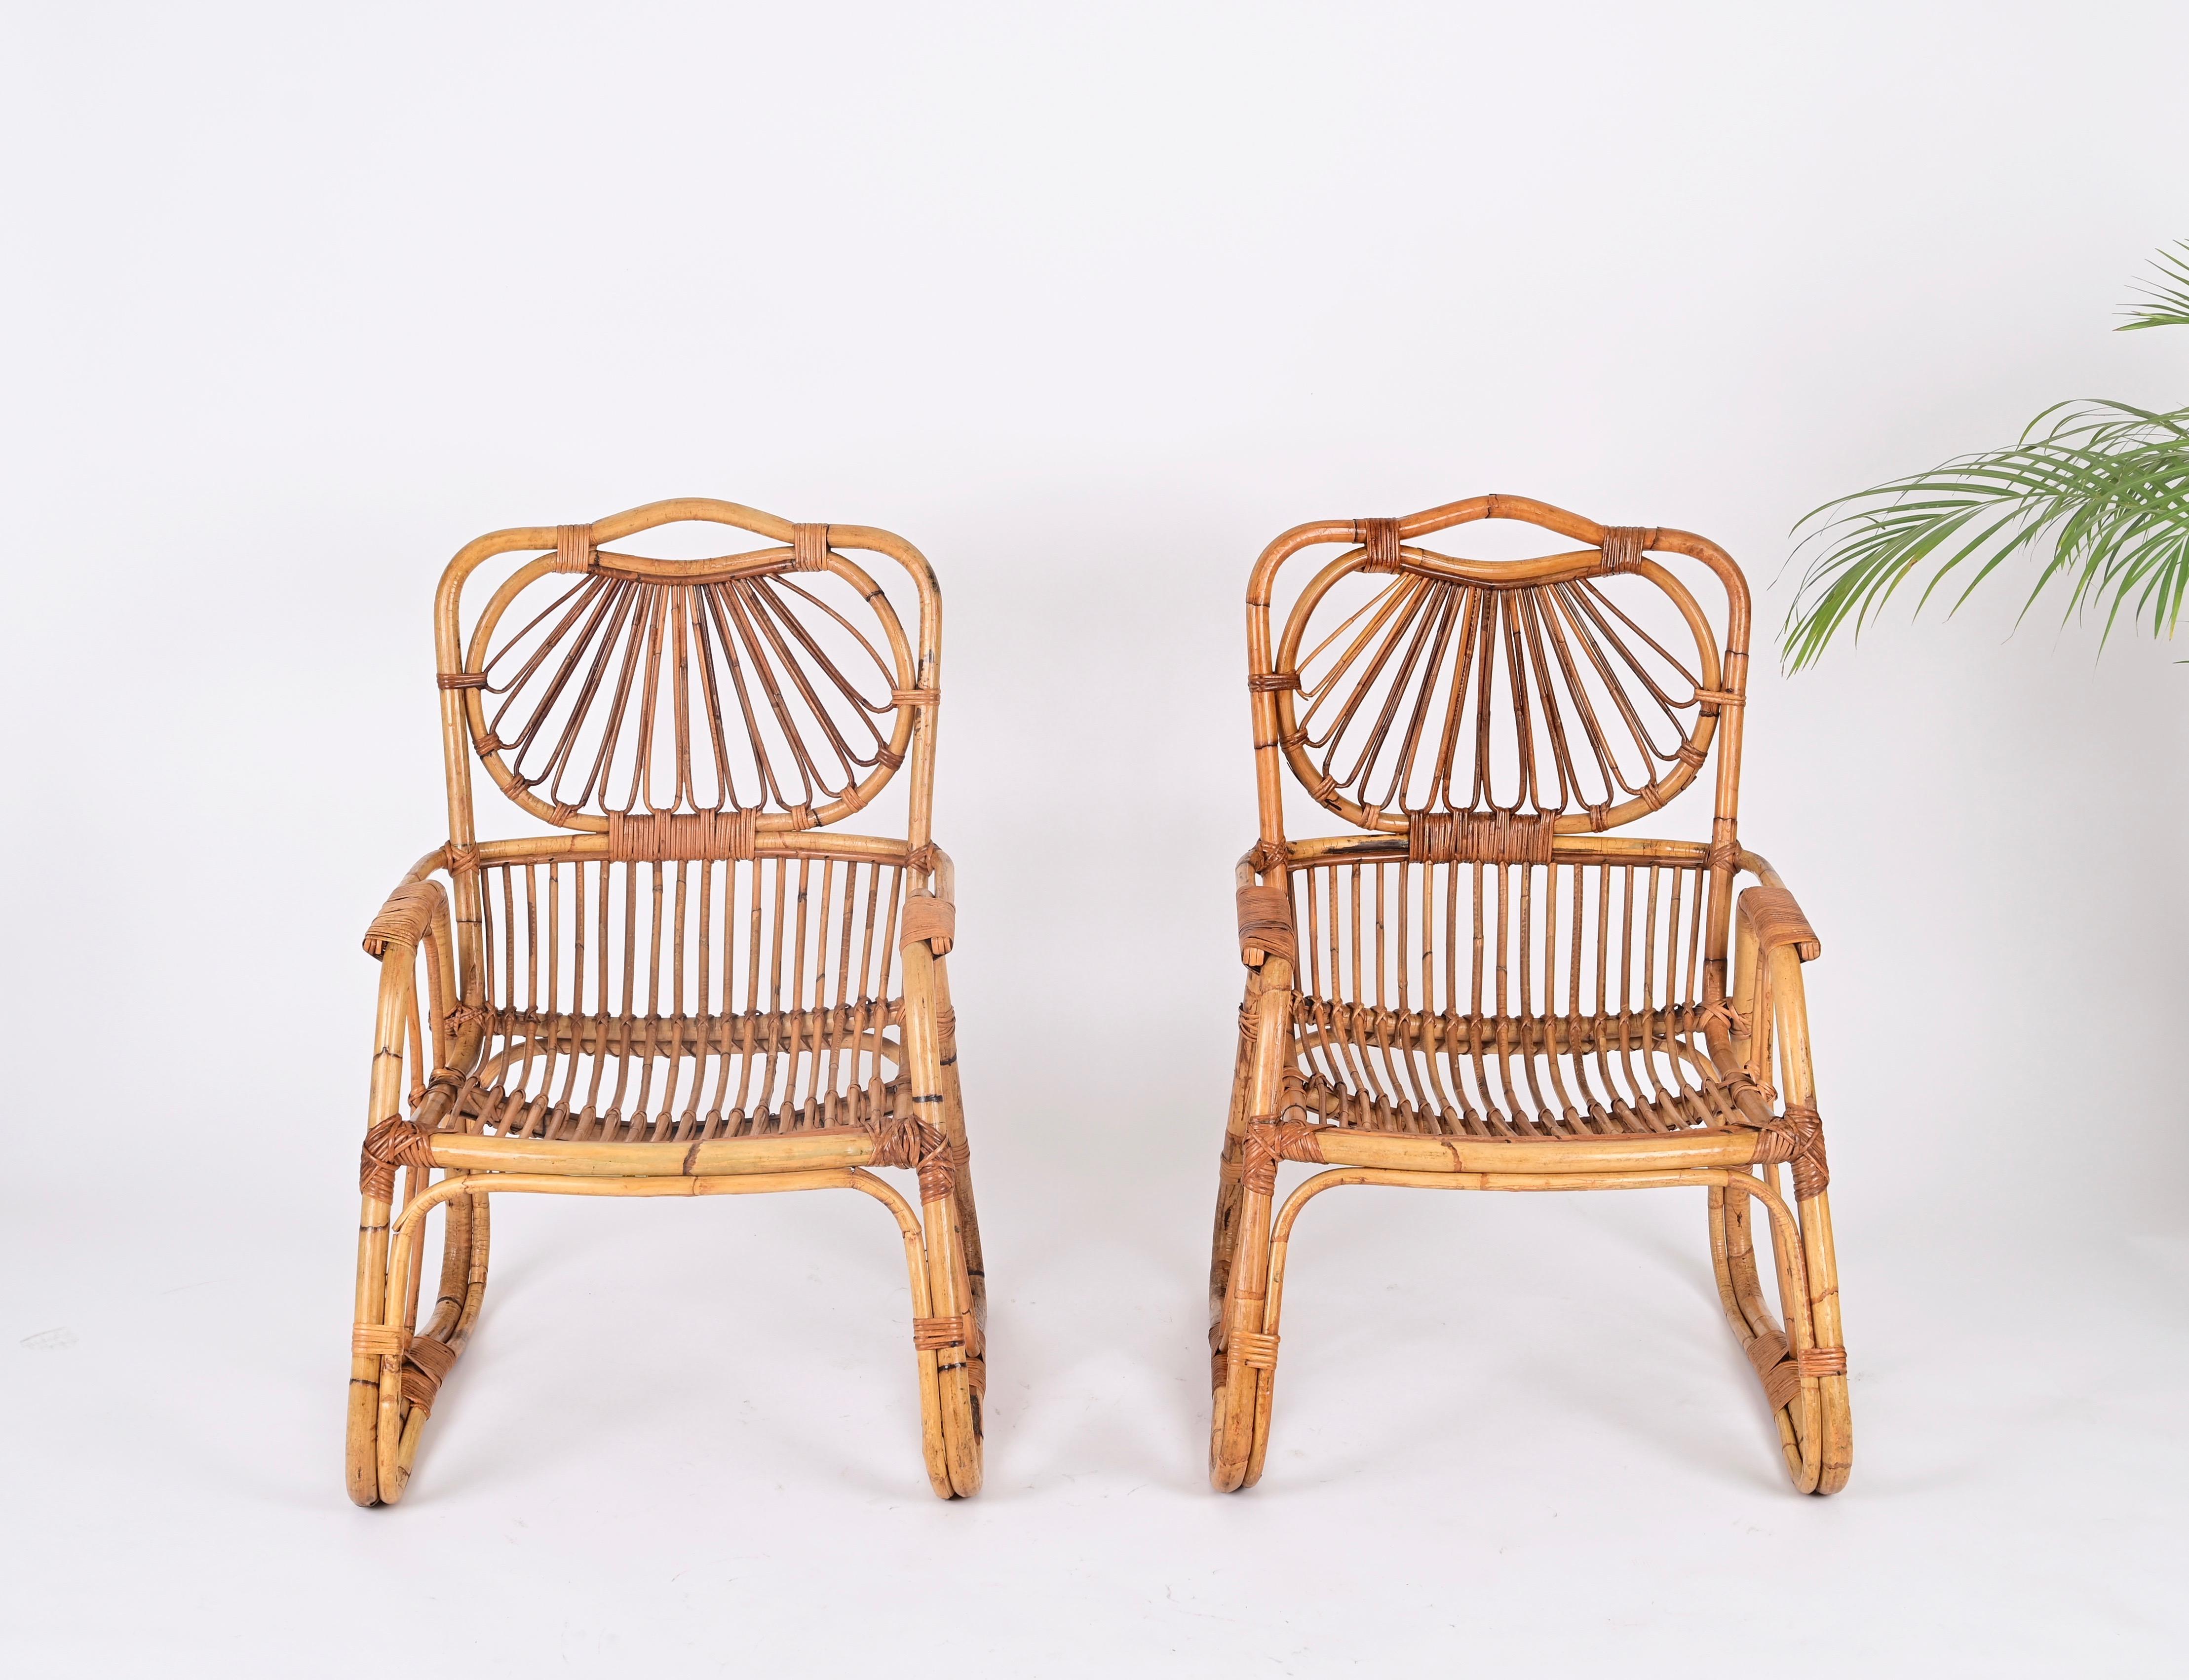 Pair of Giovanni Travasa Bamboo, Rattan and Wicker Italian Armchairs, 1960s For Sale 5